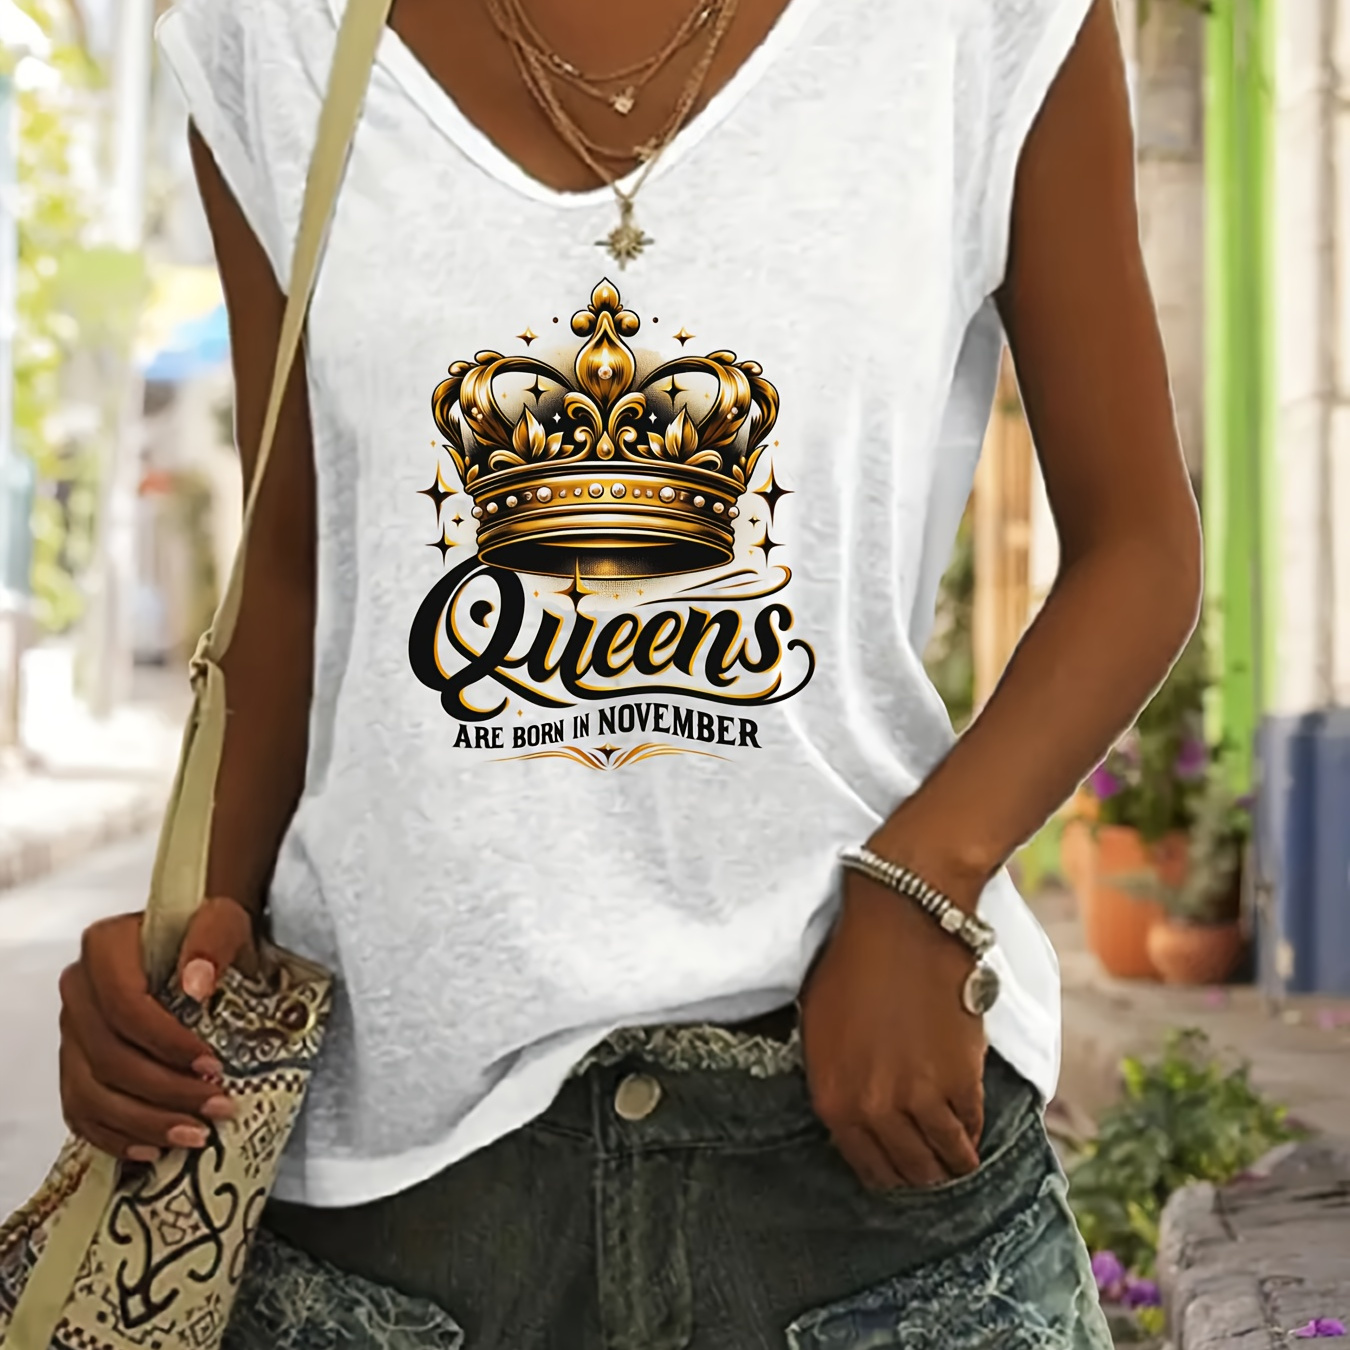 

Queens Crown Print V-neck Tank Top, Sleeveless Casual Top For Summer & Spring, Women's Clothing